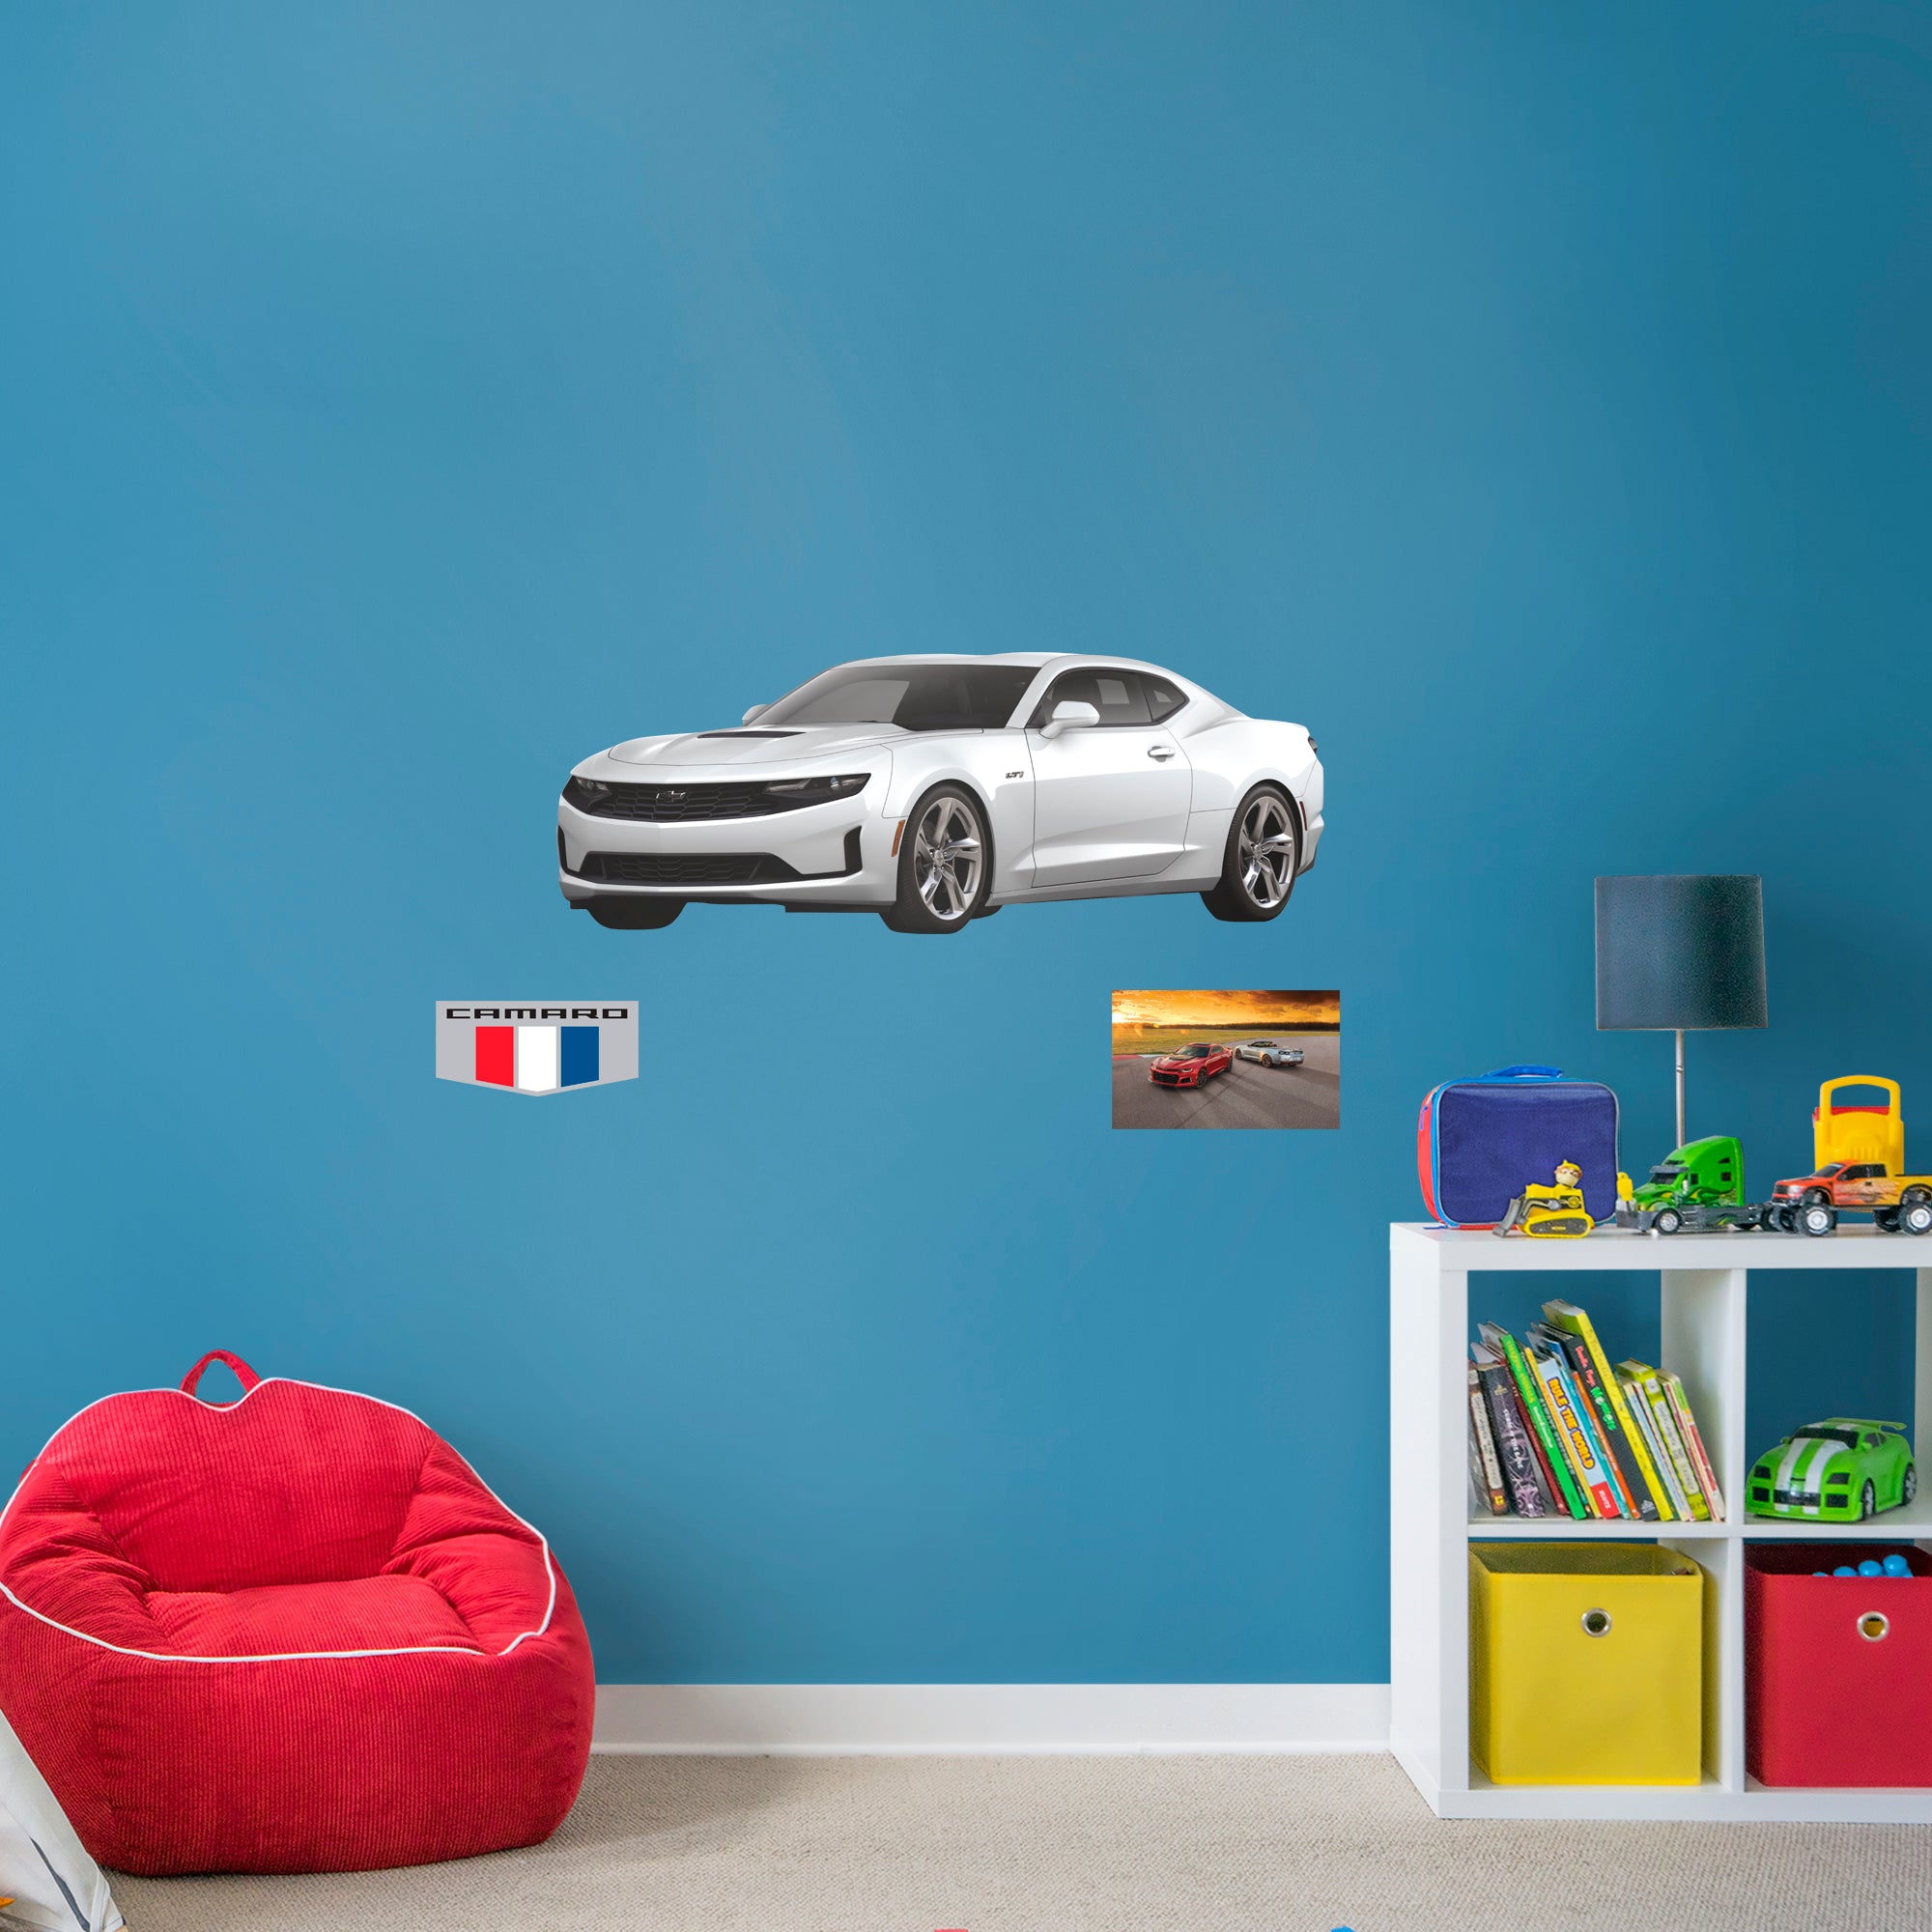 Chevrolet White Camaro: Officially Licensed GM Removable Wall Decal Giant + 2 Decals by Fathead | Vinyl